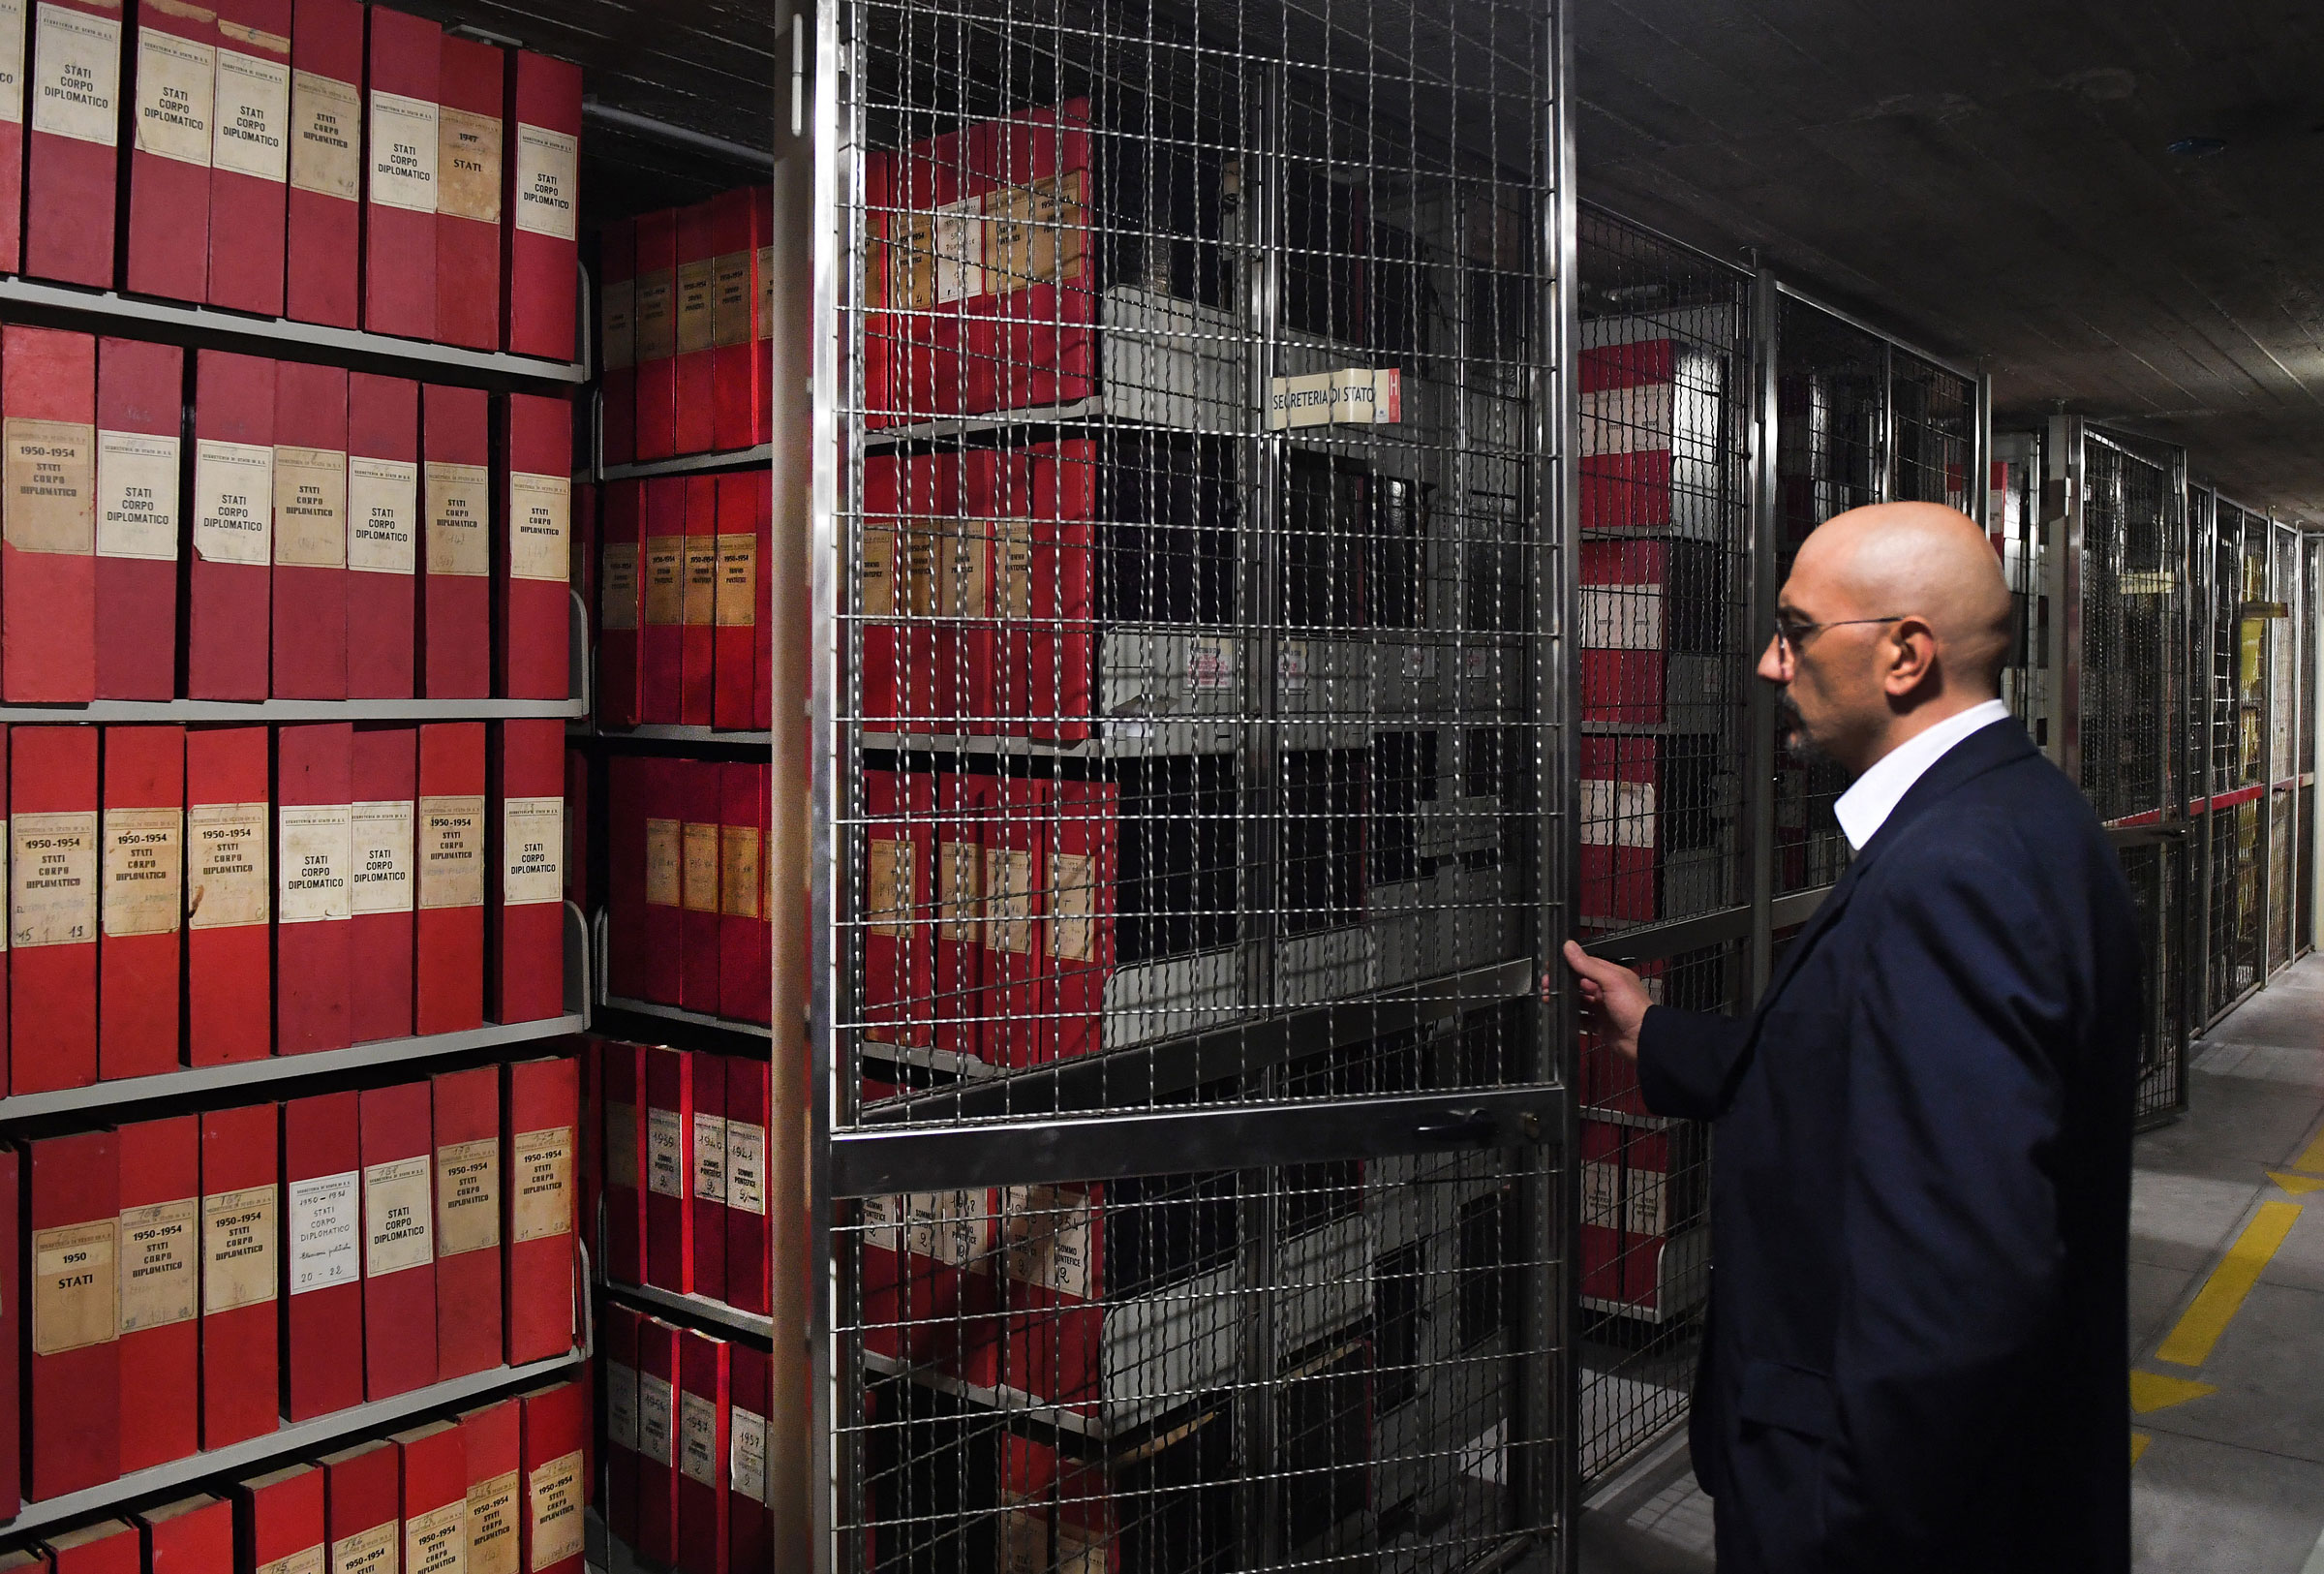 An attendant opens the section of the archive dedicated to Pope Pius XII in the Vatican Apostolic Archives on Feb. 27, 2020.